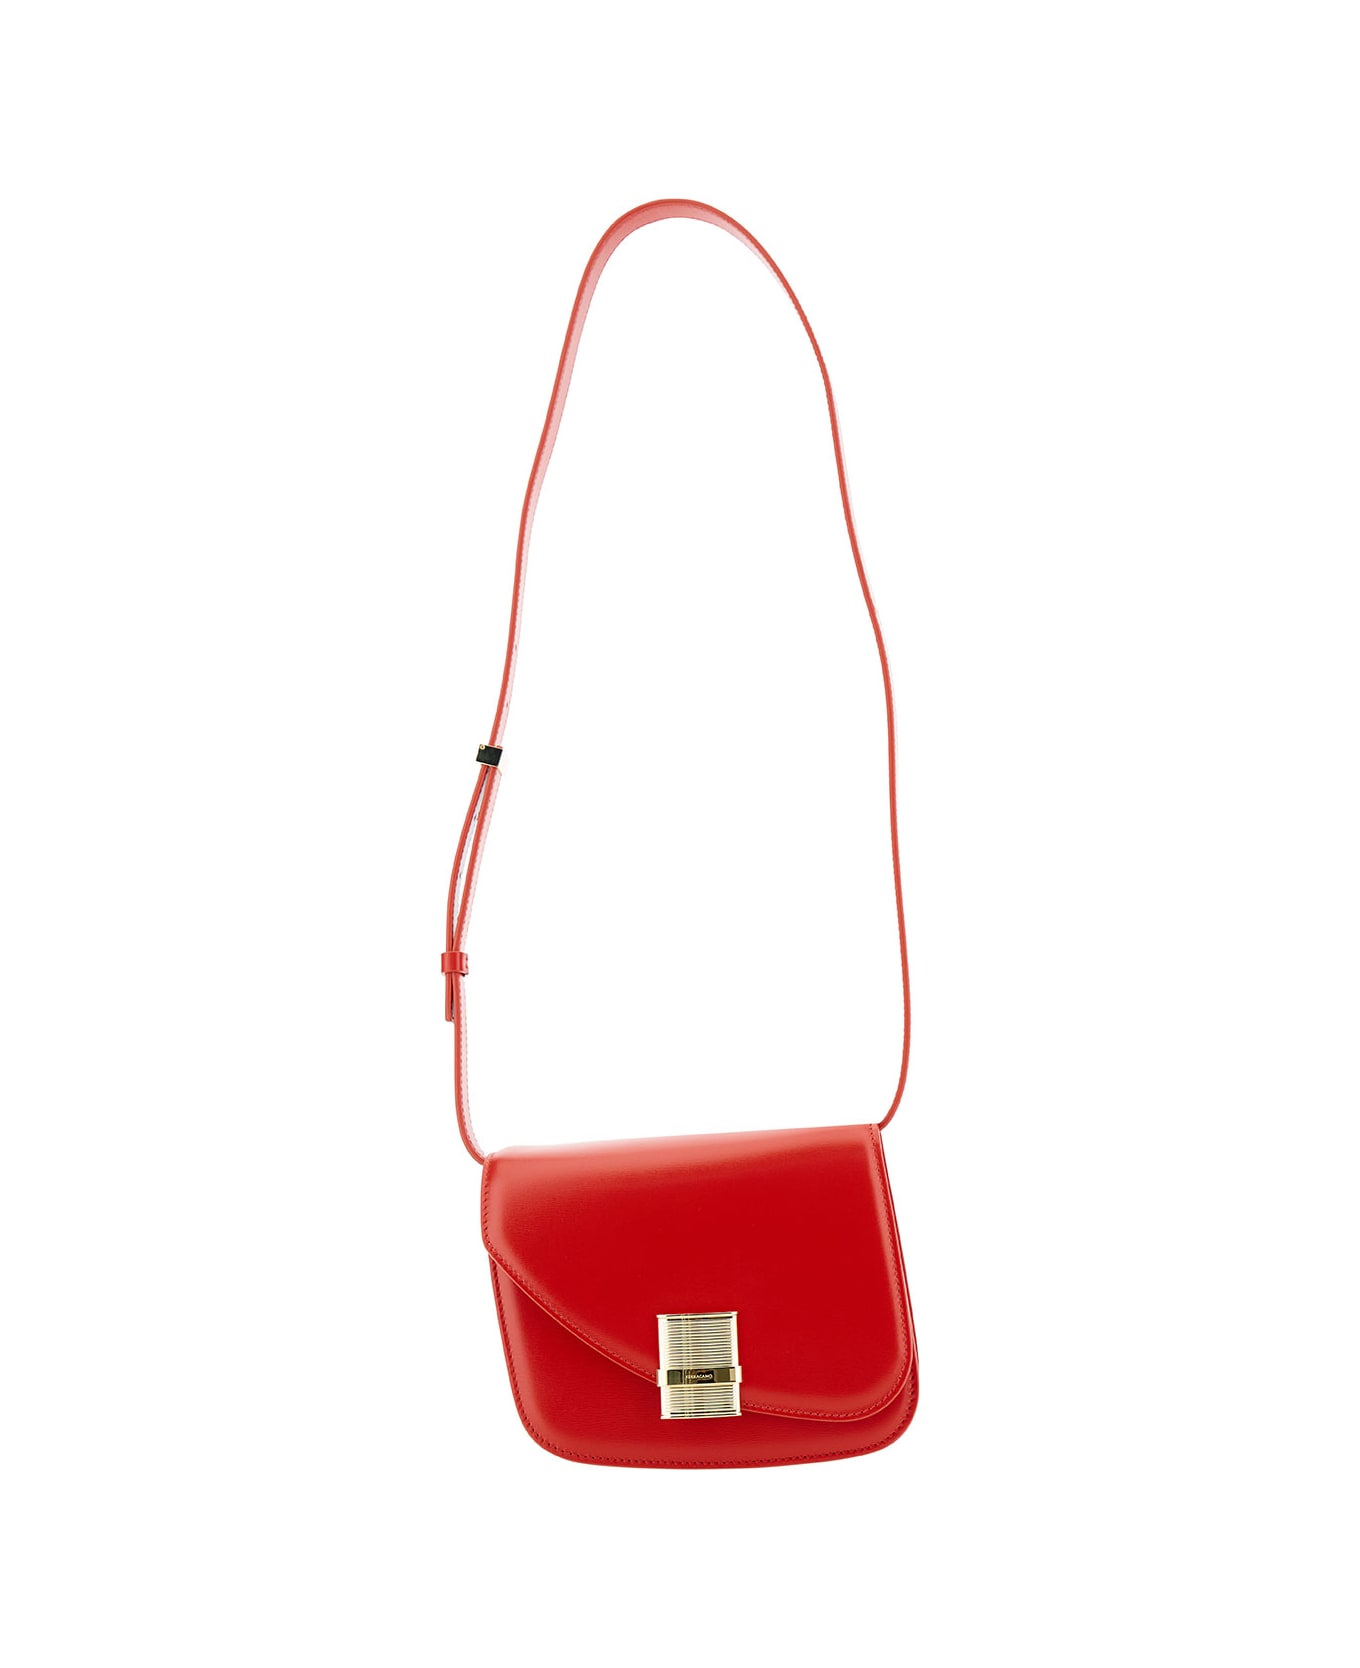 Ferragamo 'oyster' Red Asymmetric Crossbody Bag With Logo Detail In Leather Woman - Red トートバッグ